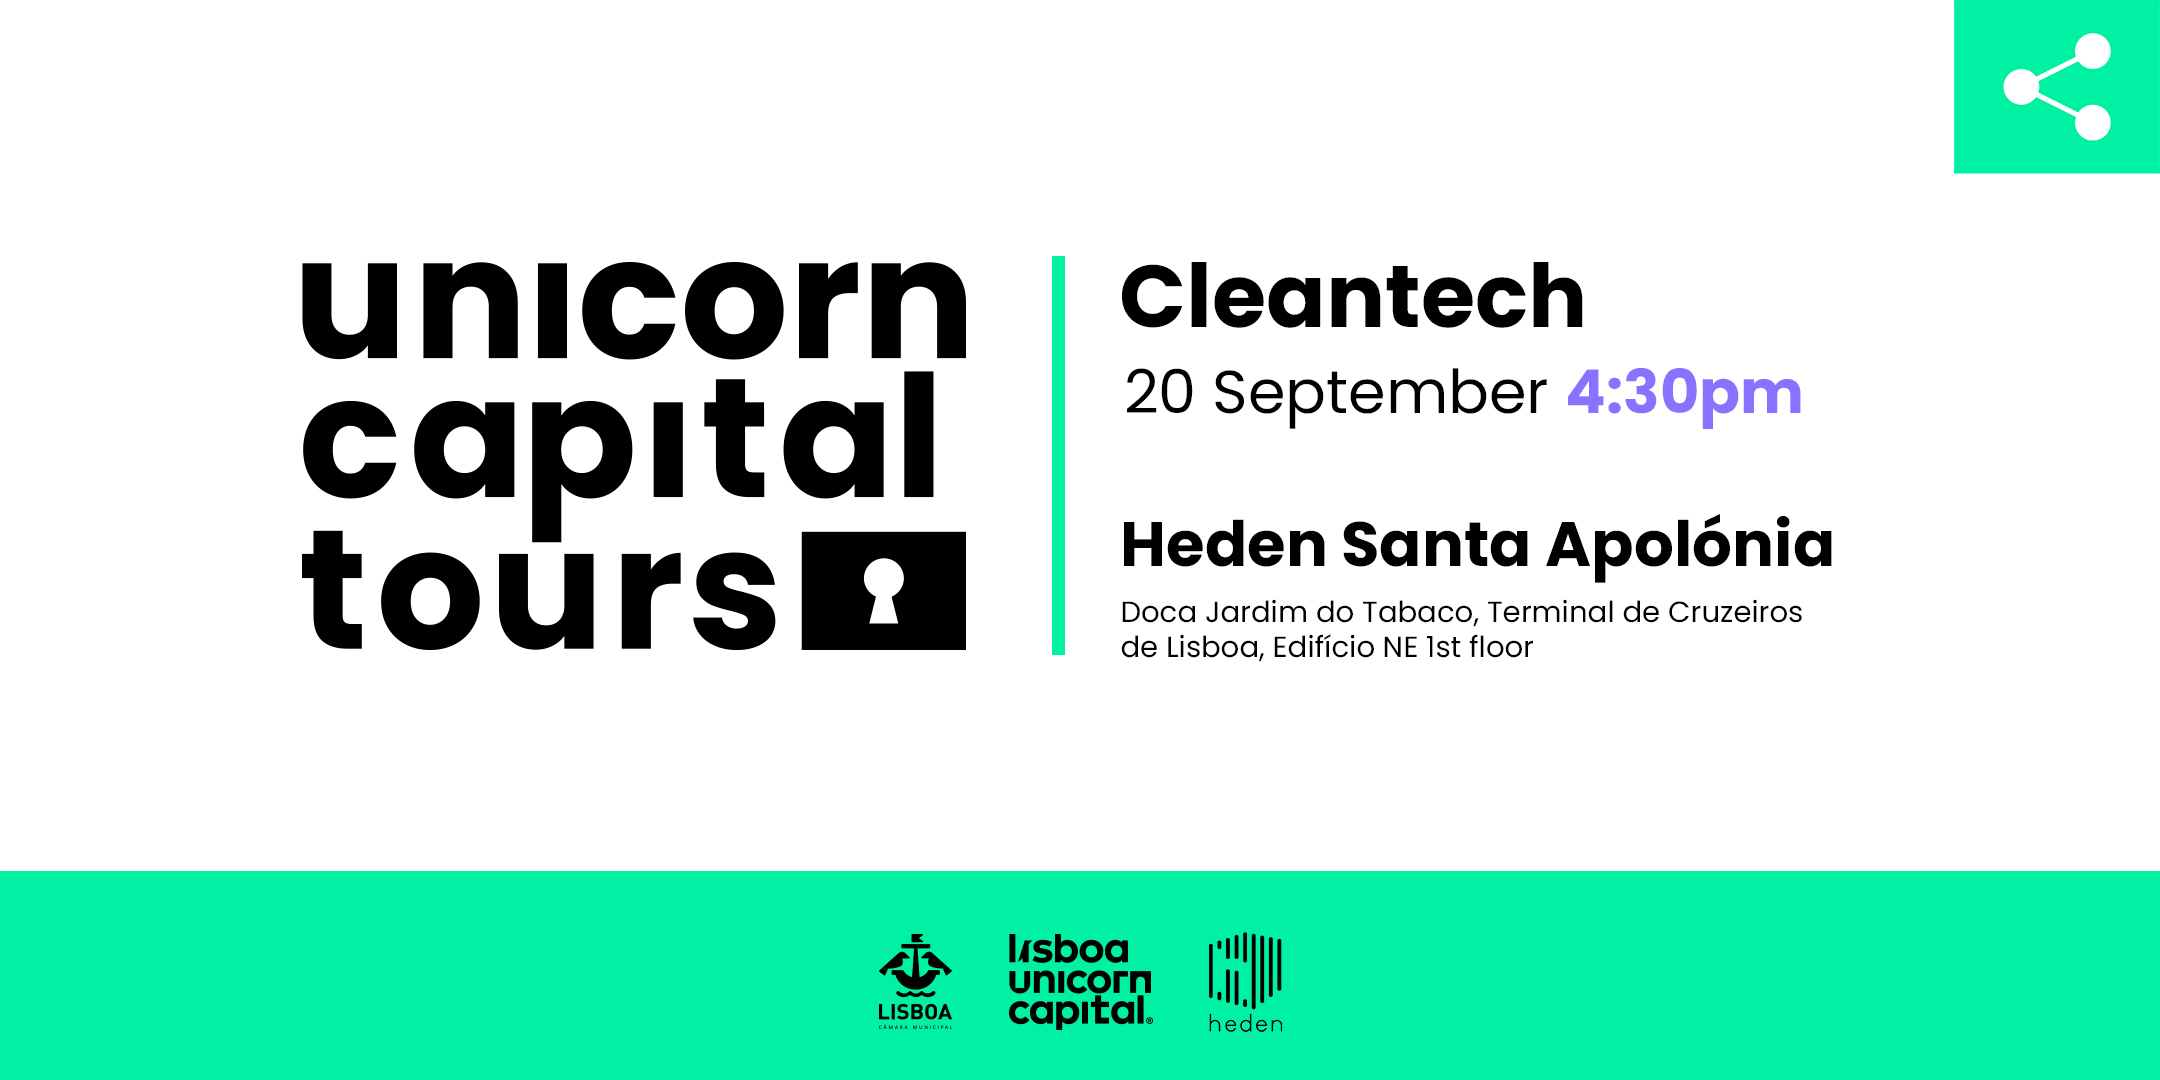 Unicorn Capital Tours are back to talk about cleantech